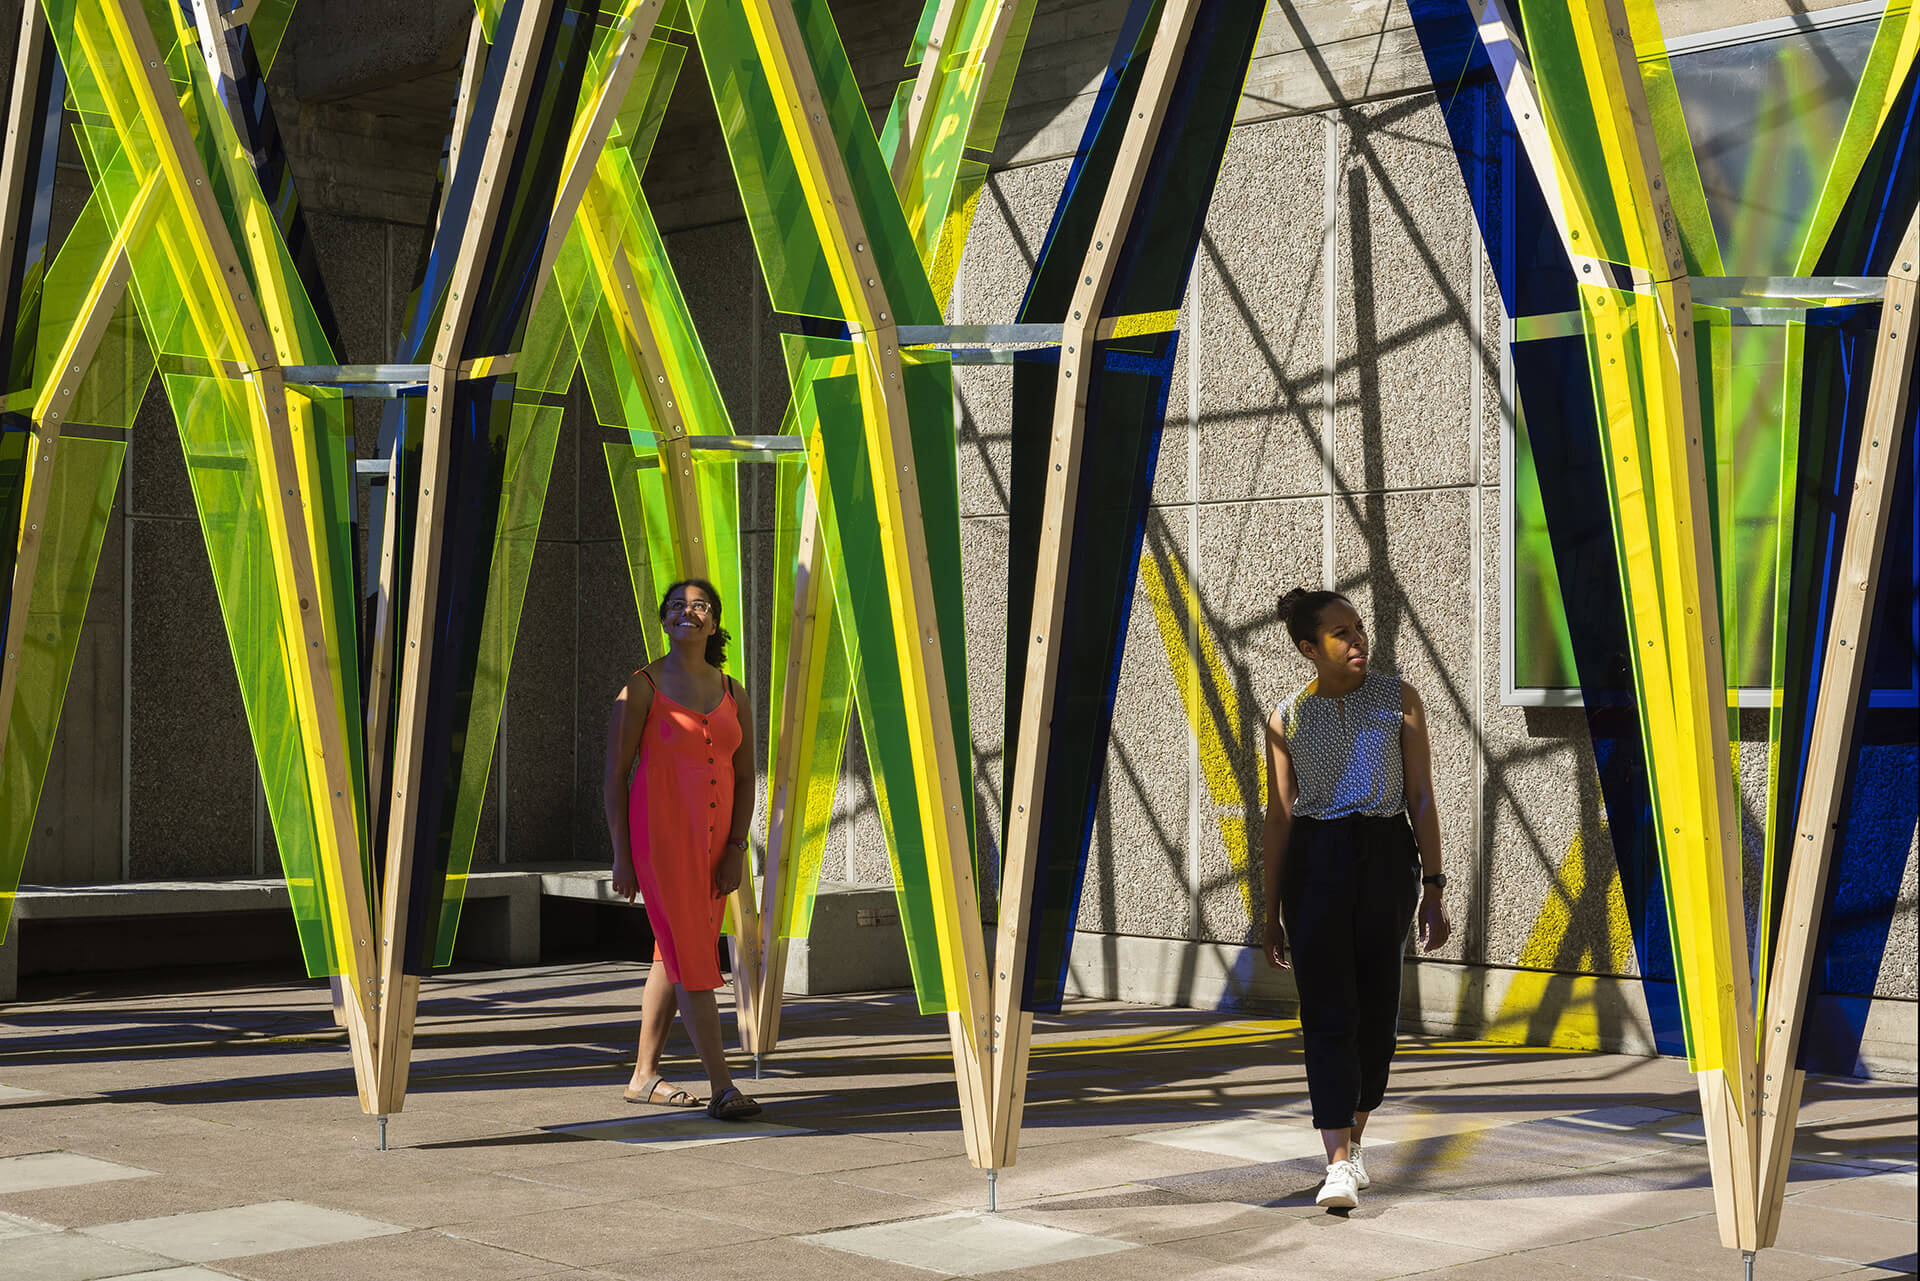 Jyll Bradley's The Hop sculpture, installed outside The Hayward Gallery at Southbank Centre. It is made of tall beams of yellow and blue perspex reaching up towards the sky, at approximately 12 feet tall. Two women are positioned between the beams, looking at the sculpture.